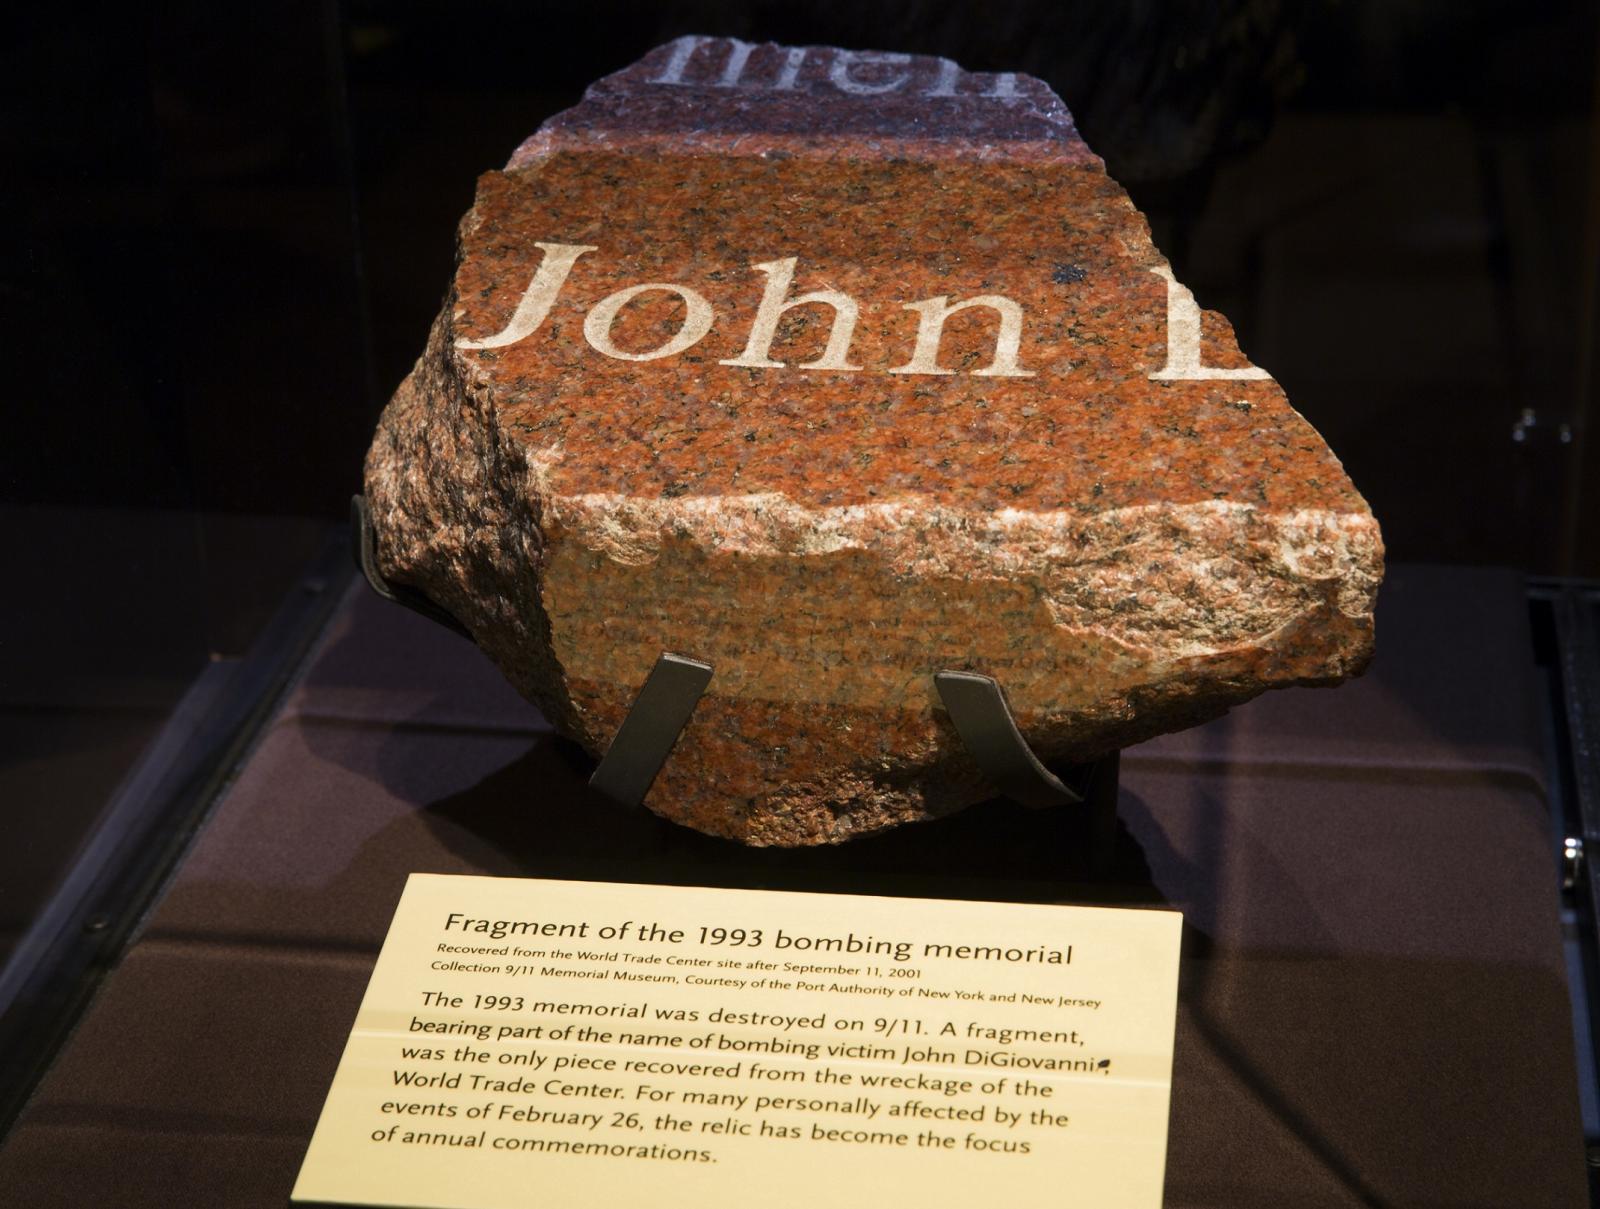 A fragment from the original memorial to the victims of the February 26, 1993 bombing is displayed at the Museum. The name “John” can clearly be read on the piece of red, black, and white granite. A Museum placard below the fragment explains its historical significance.